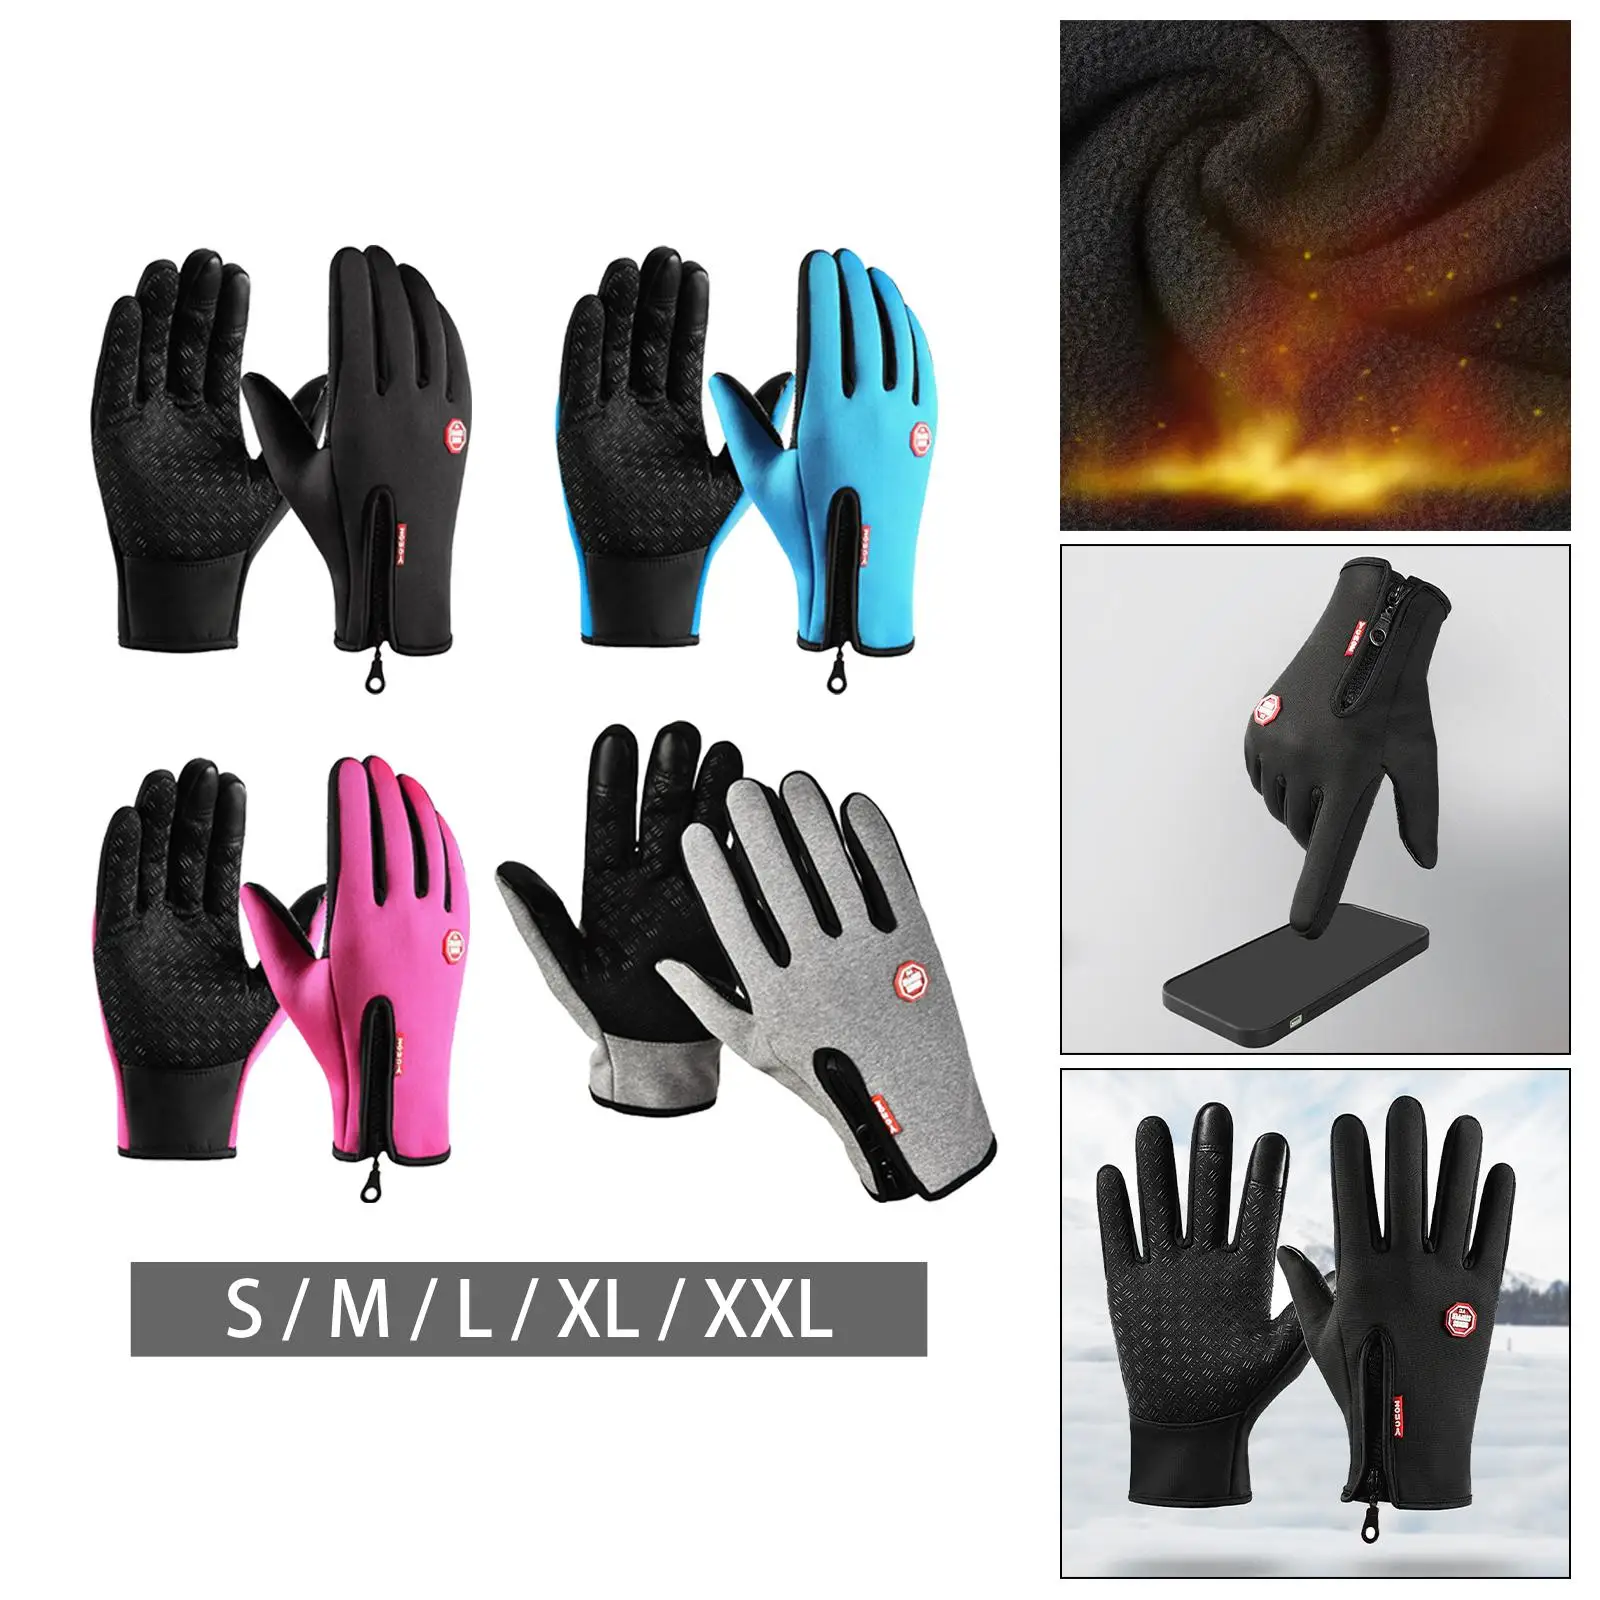 Winter Gloves Non Slip Thermal Waterproof Warm Insulated Windproof for Running Riding Motorcycle Outdoor Sports Adults Unisex